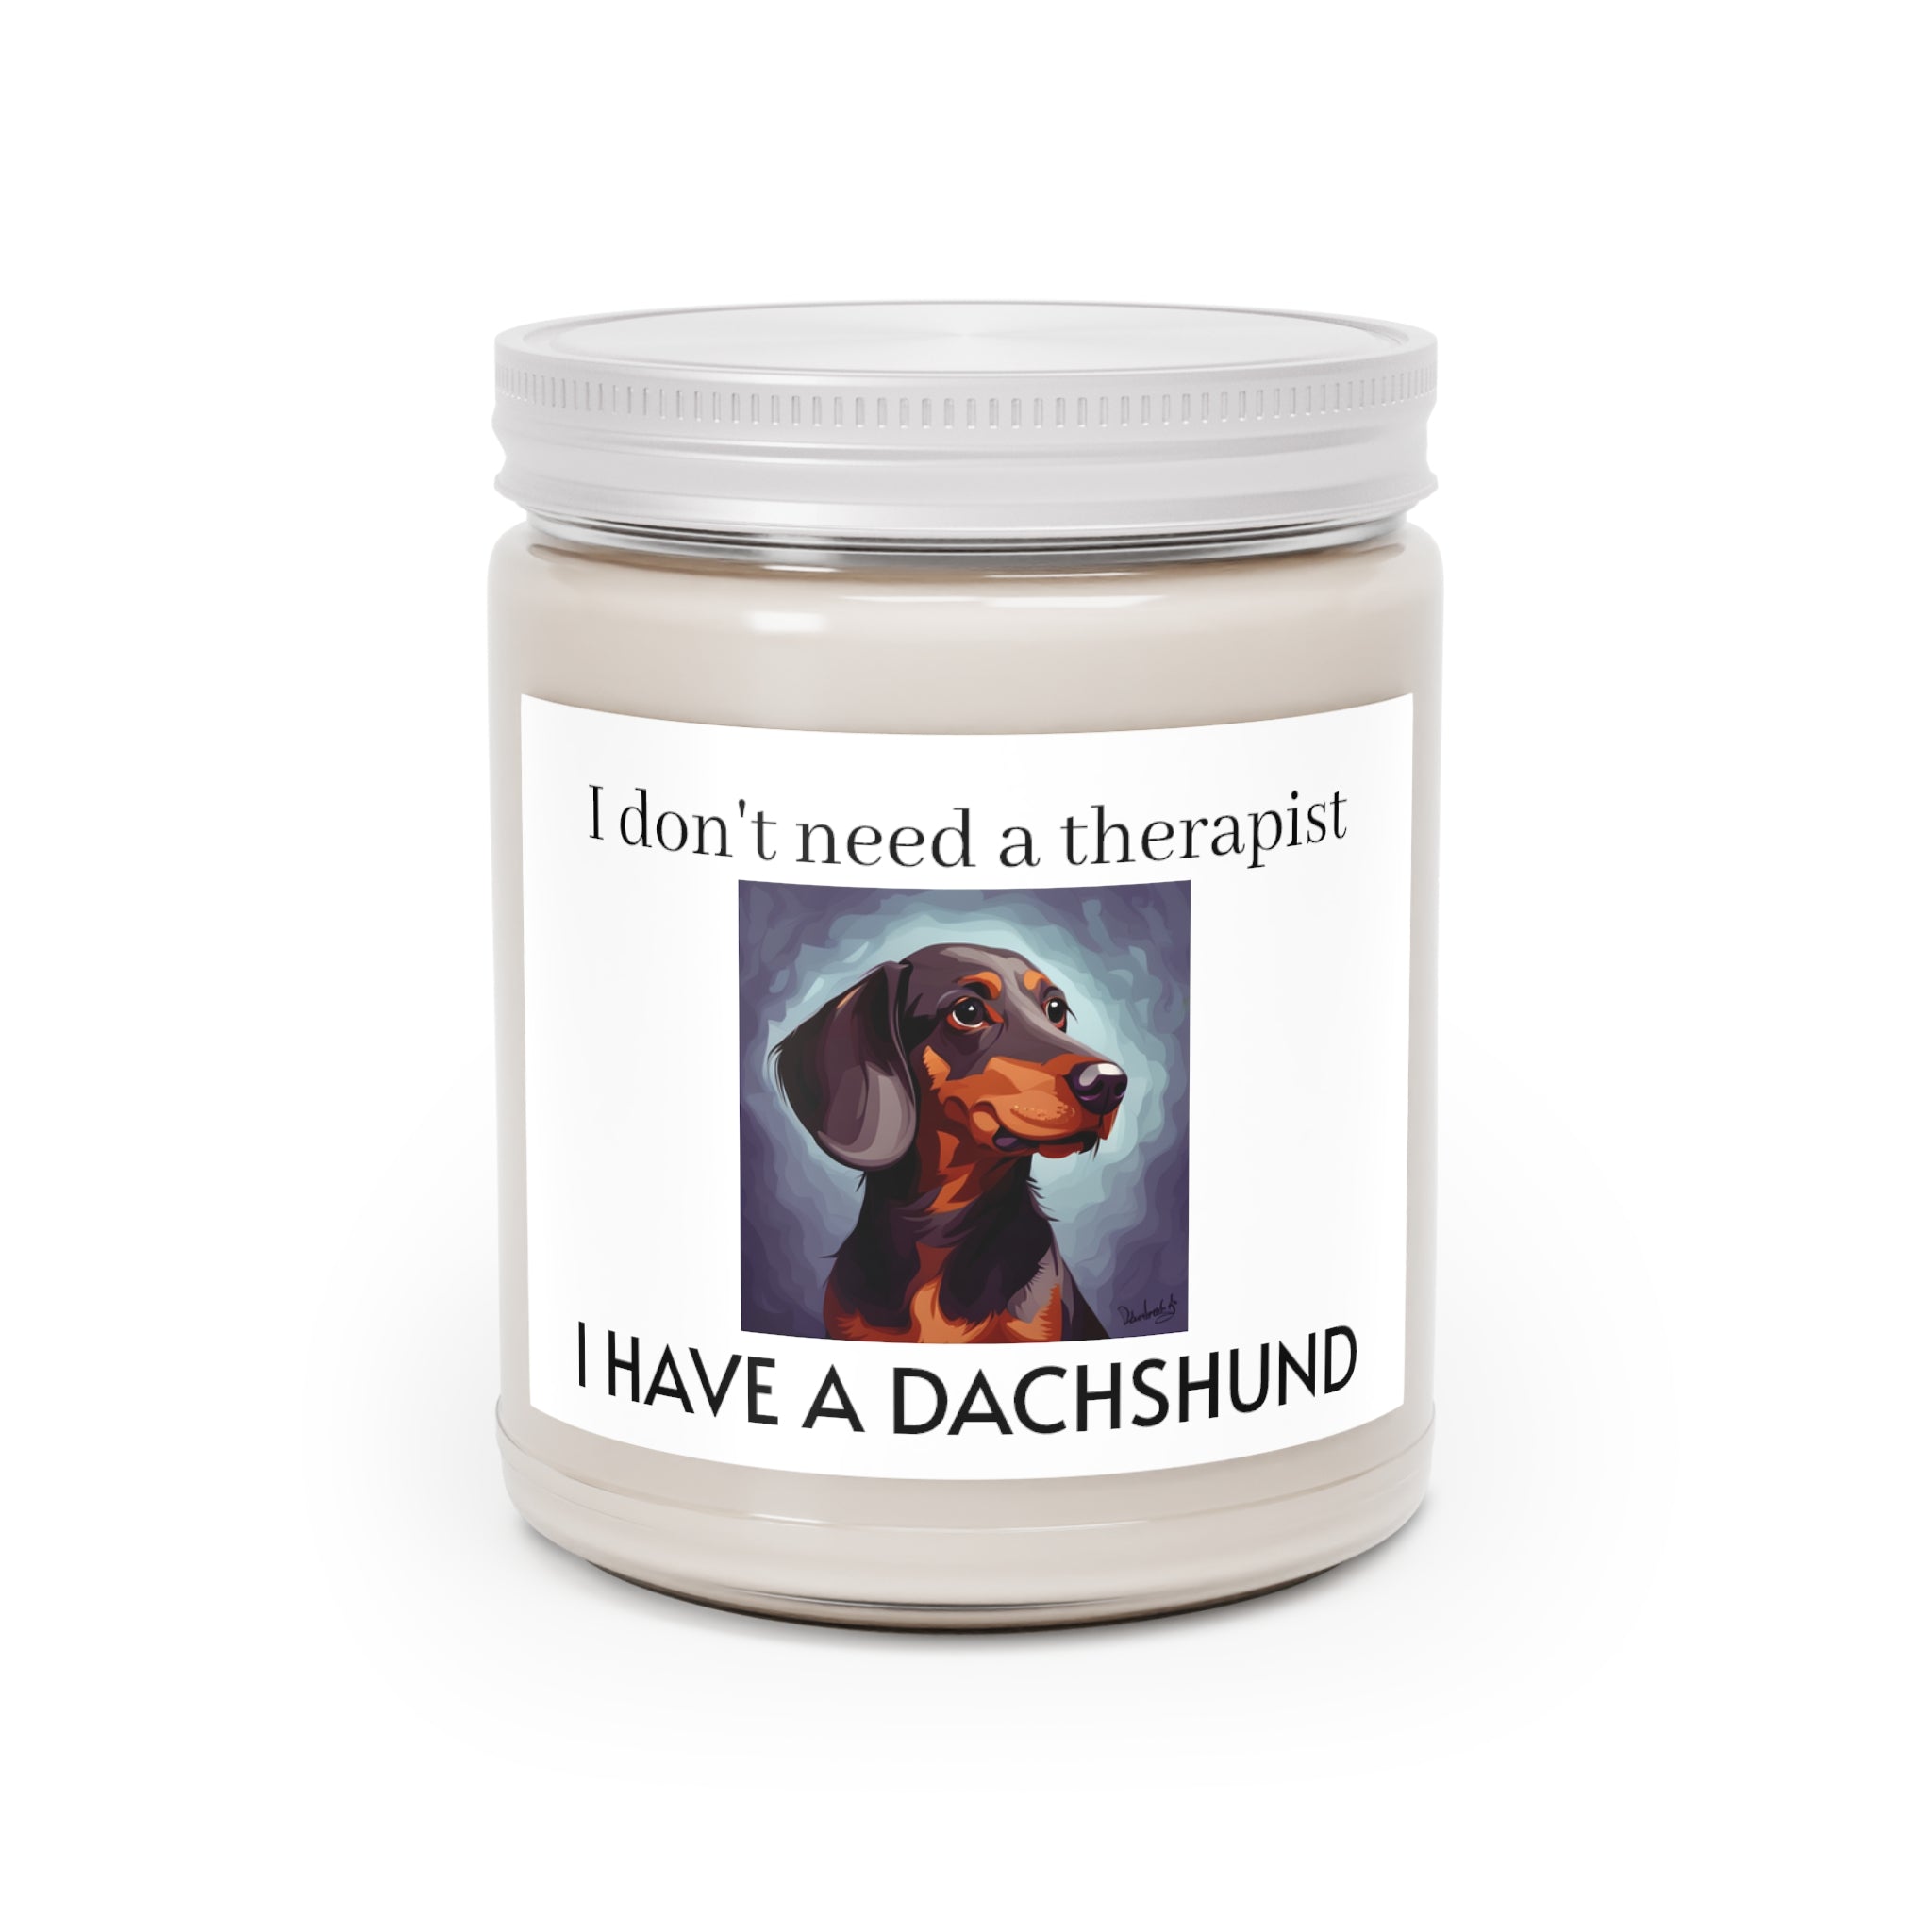 I Have A Dachshund Candle Scented Candles, 255g